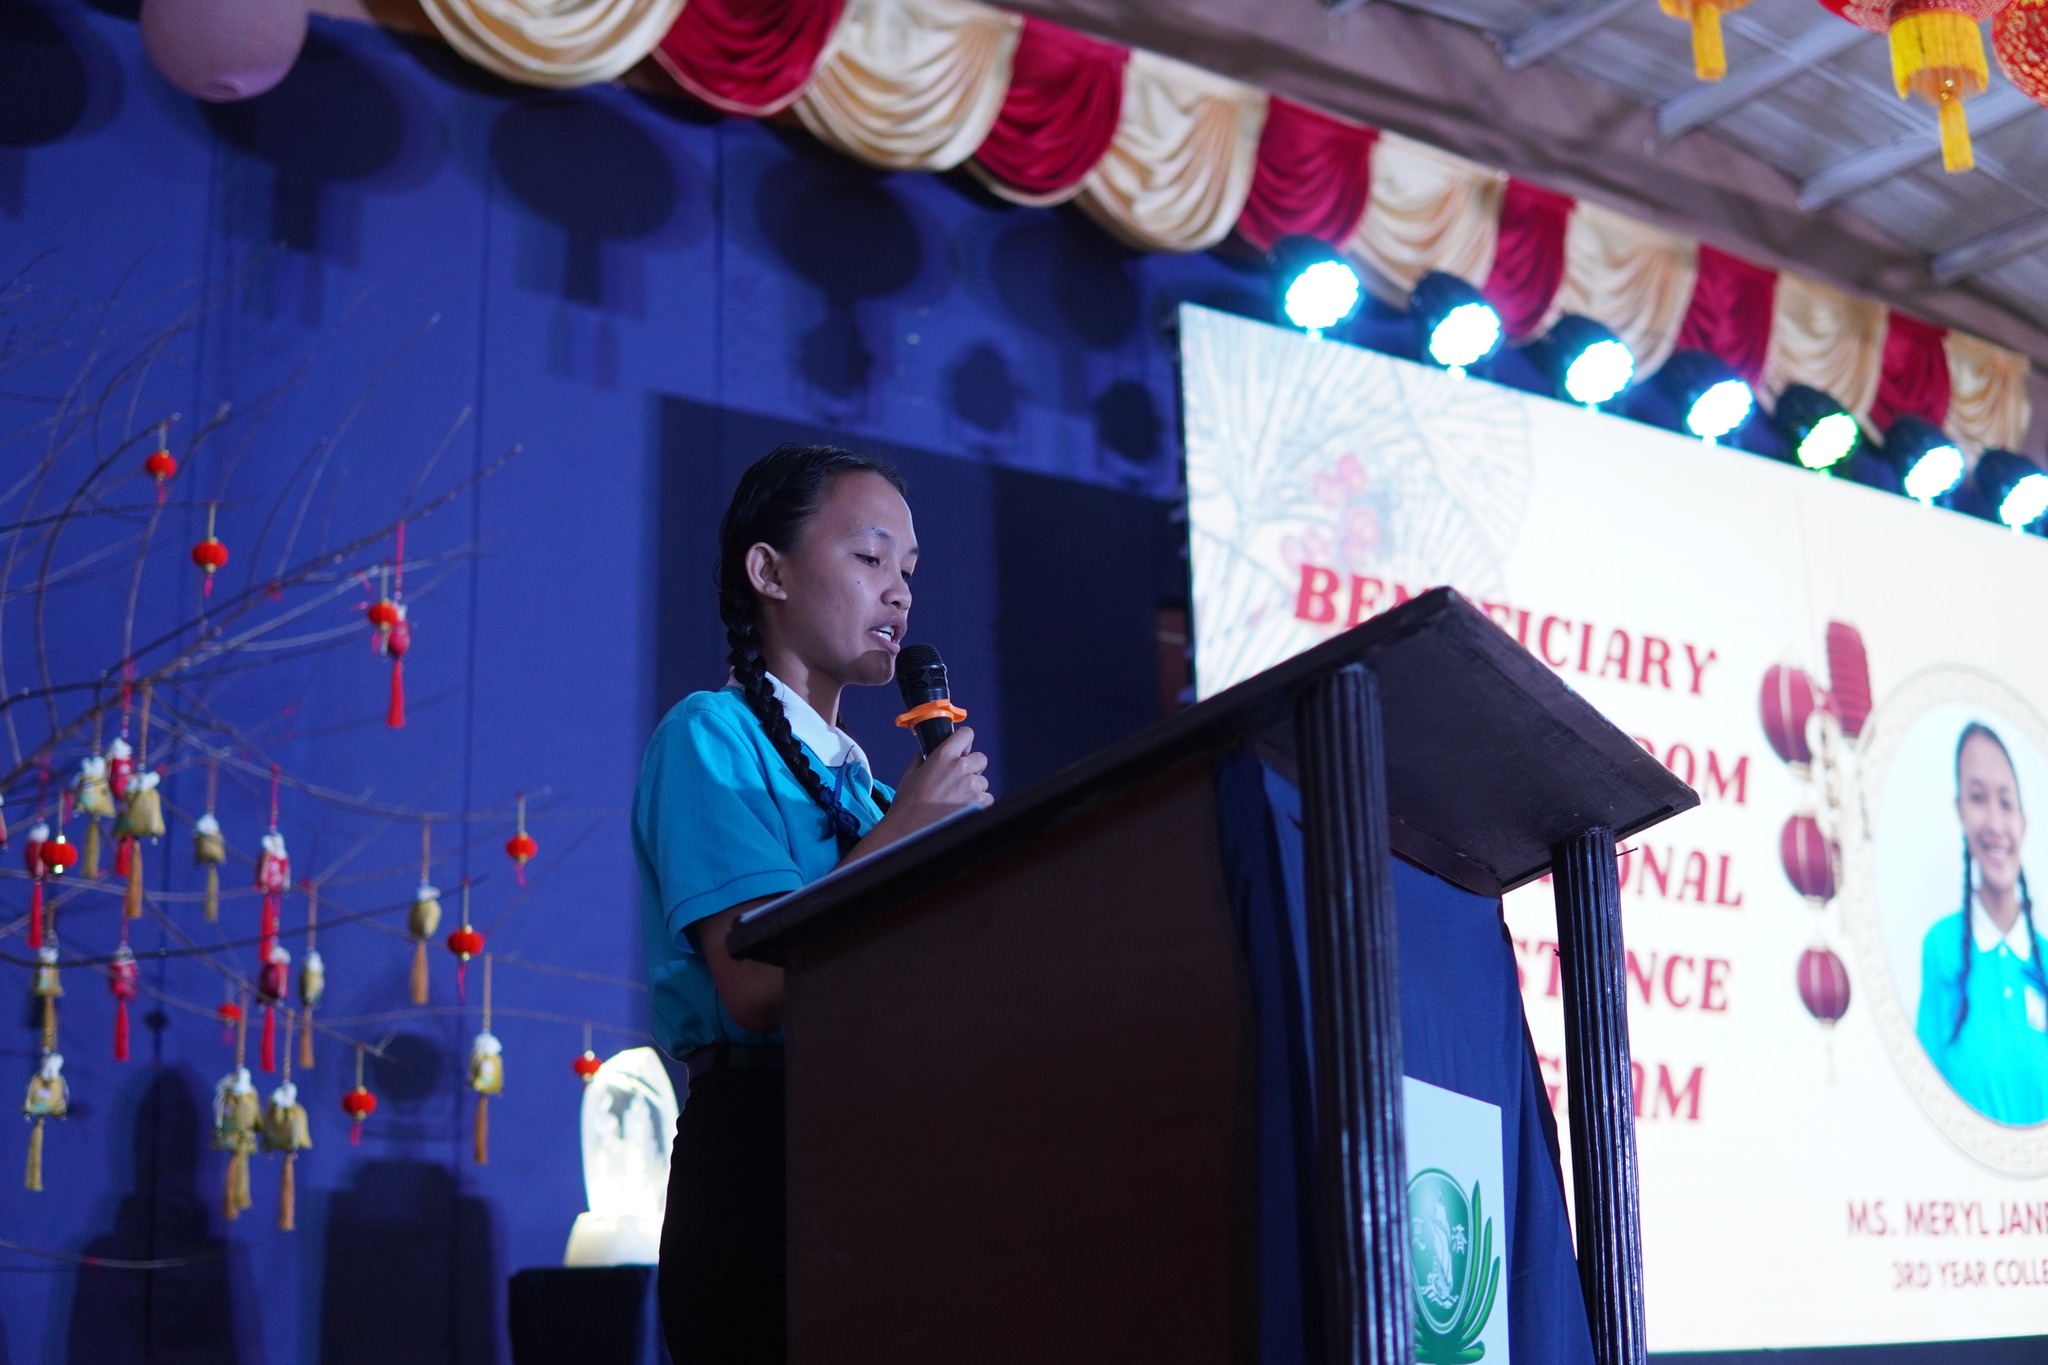 Ms. Lanuza, a third-year college student at USeP, thanked the foundation for the scholarship.【Photo by Tzu Chi Davao】